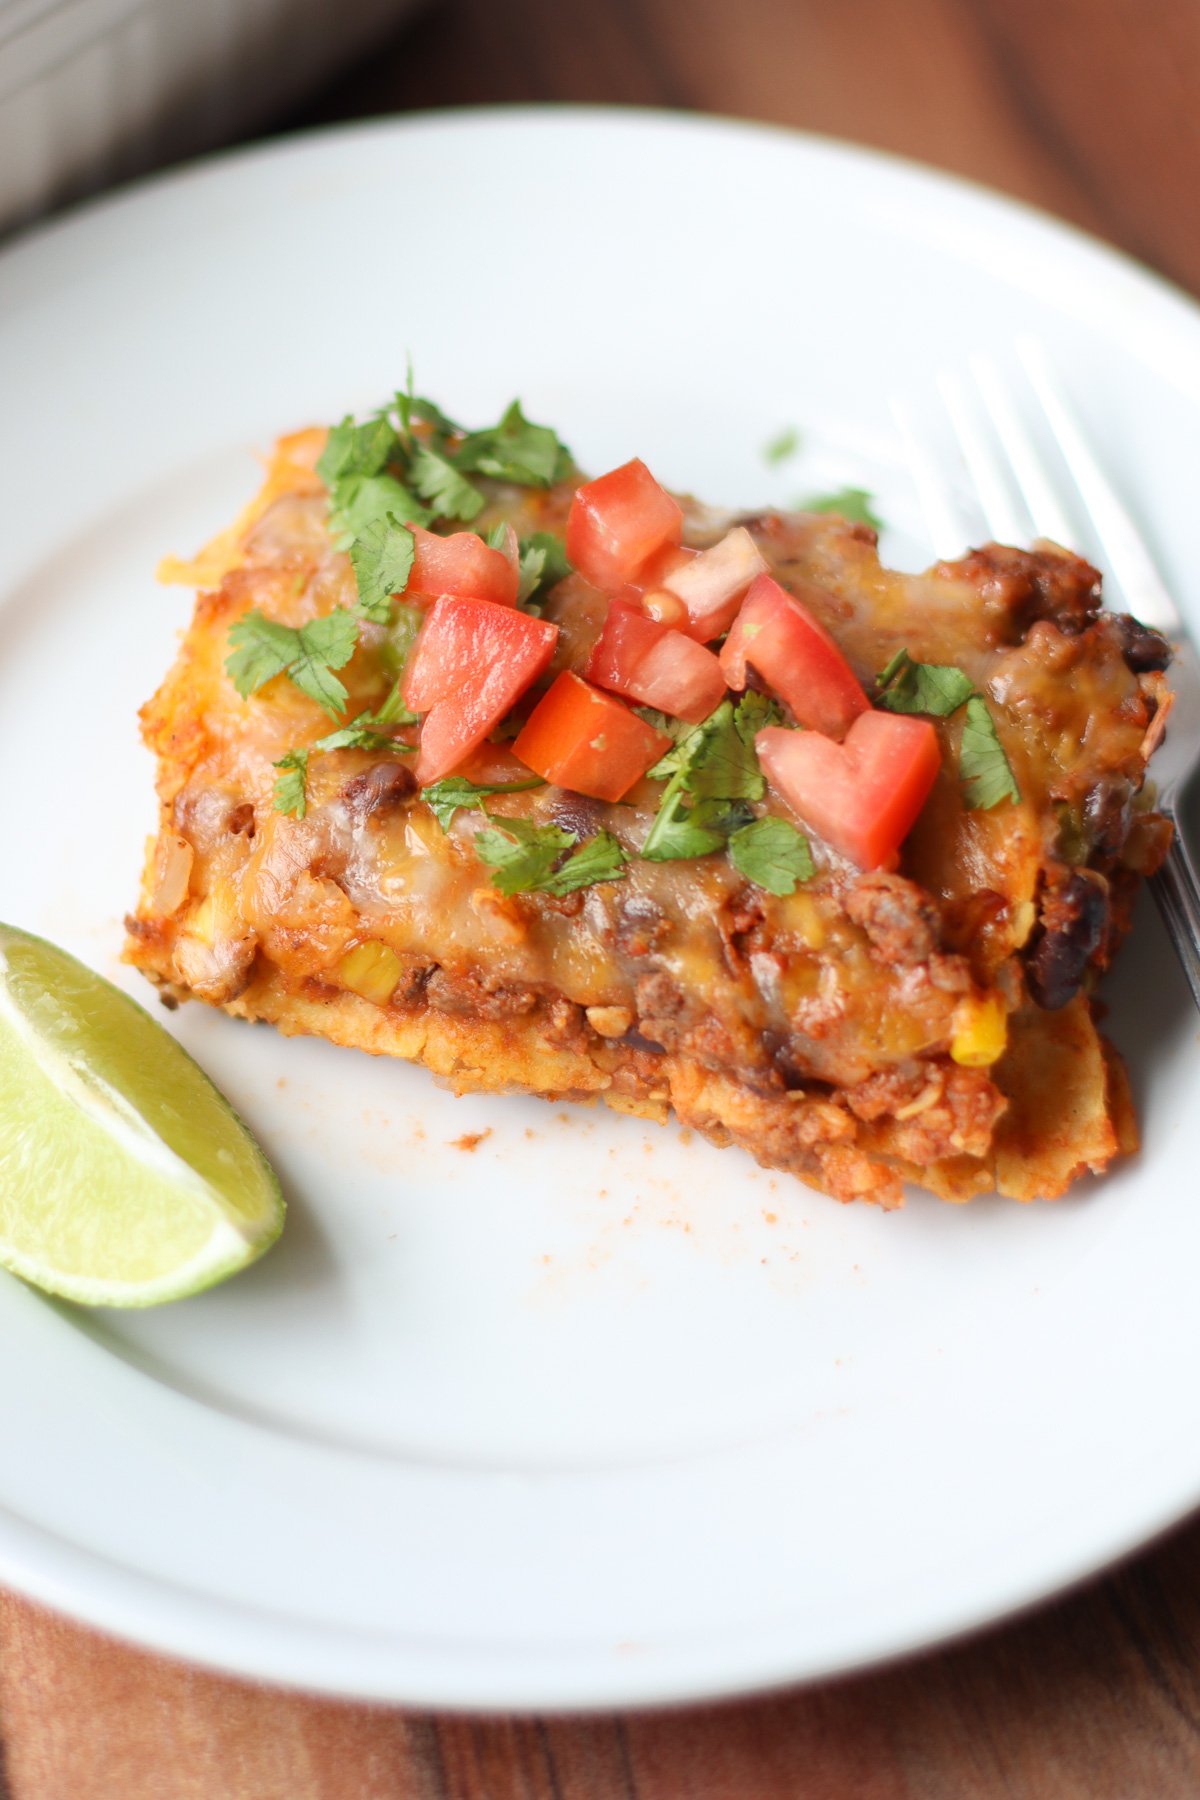 A big slice of enchilada casserole topped with tomatoes, cilantro.